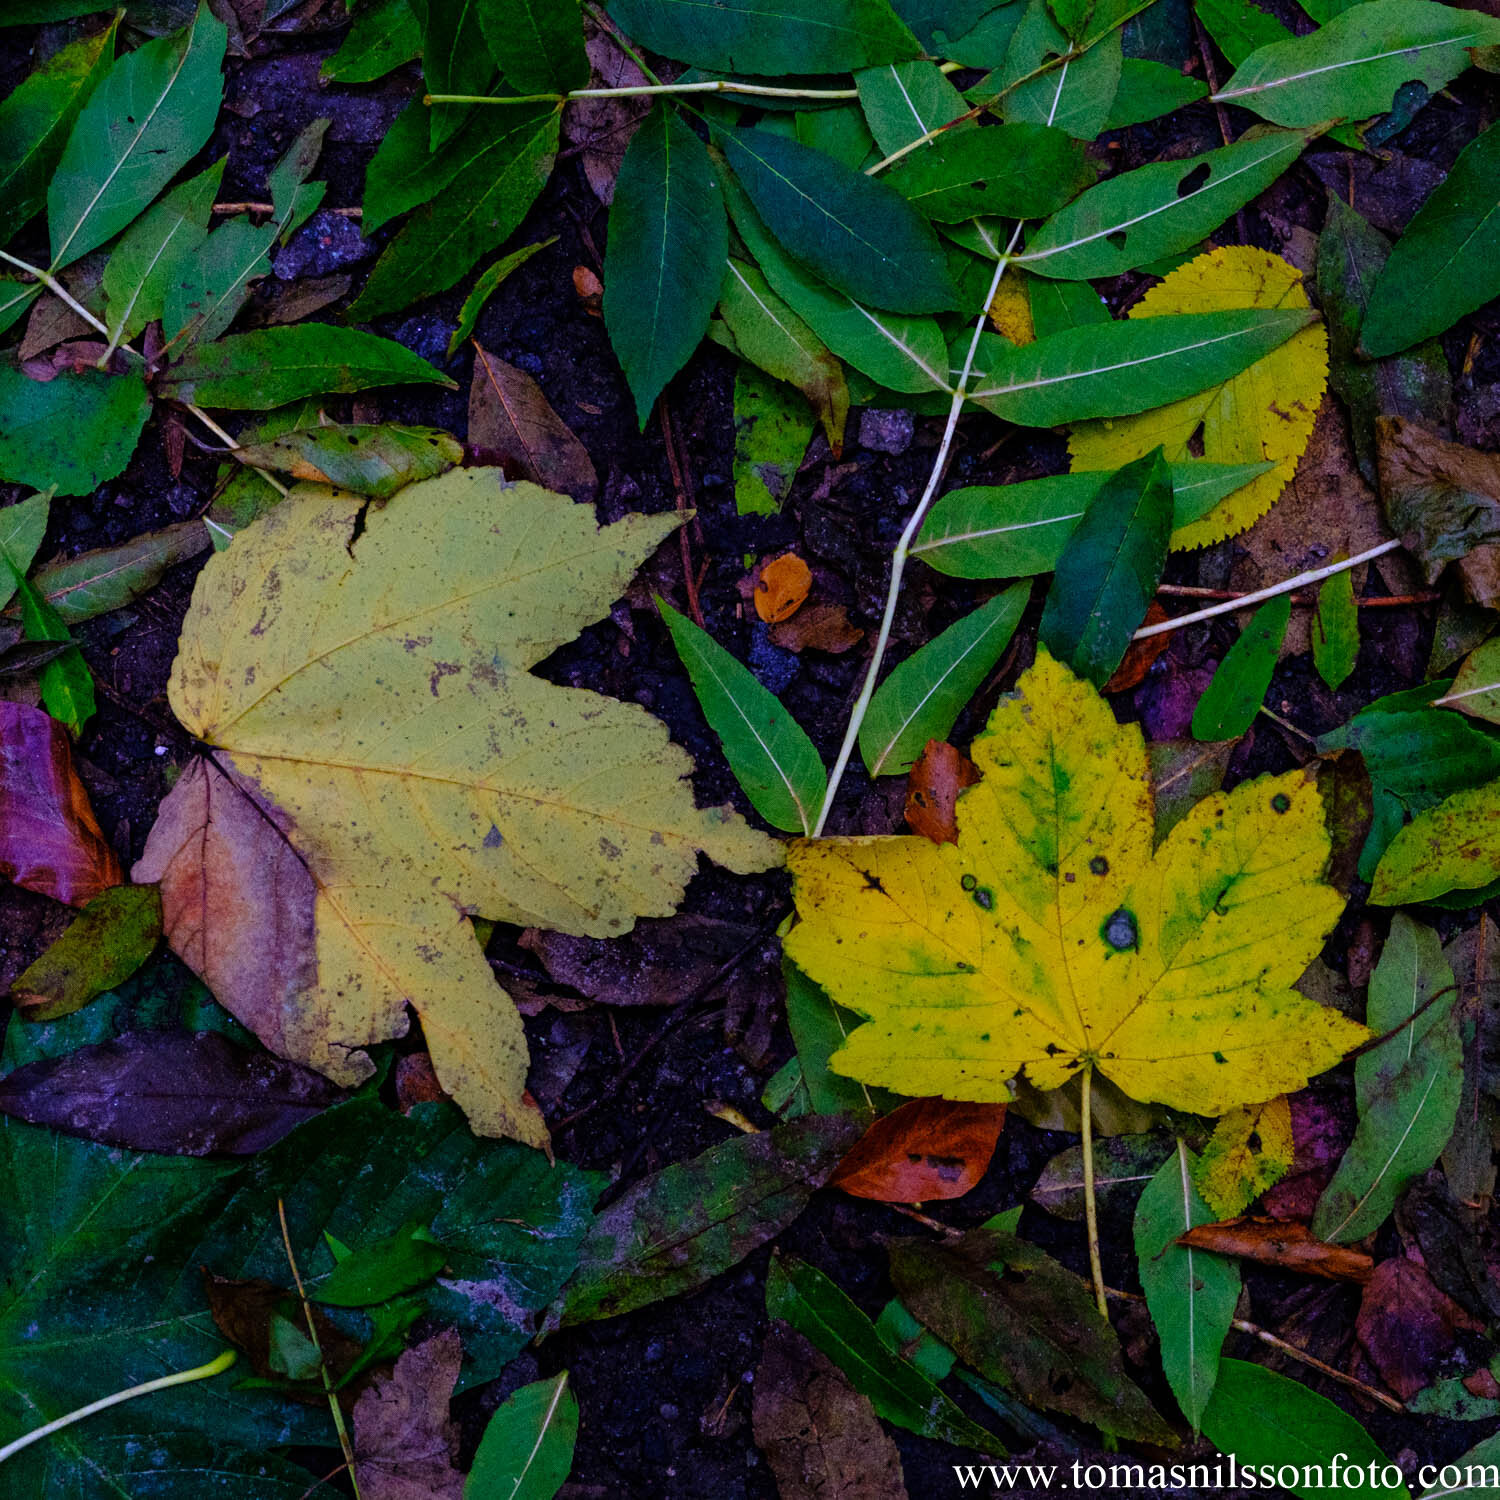 Day 298 - October 24: Old Leaves